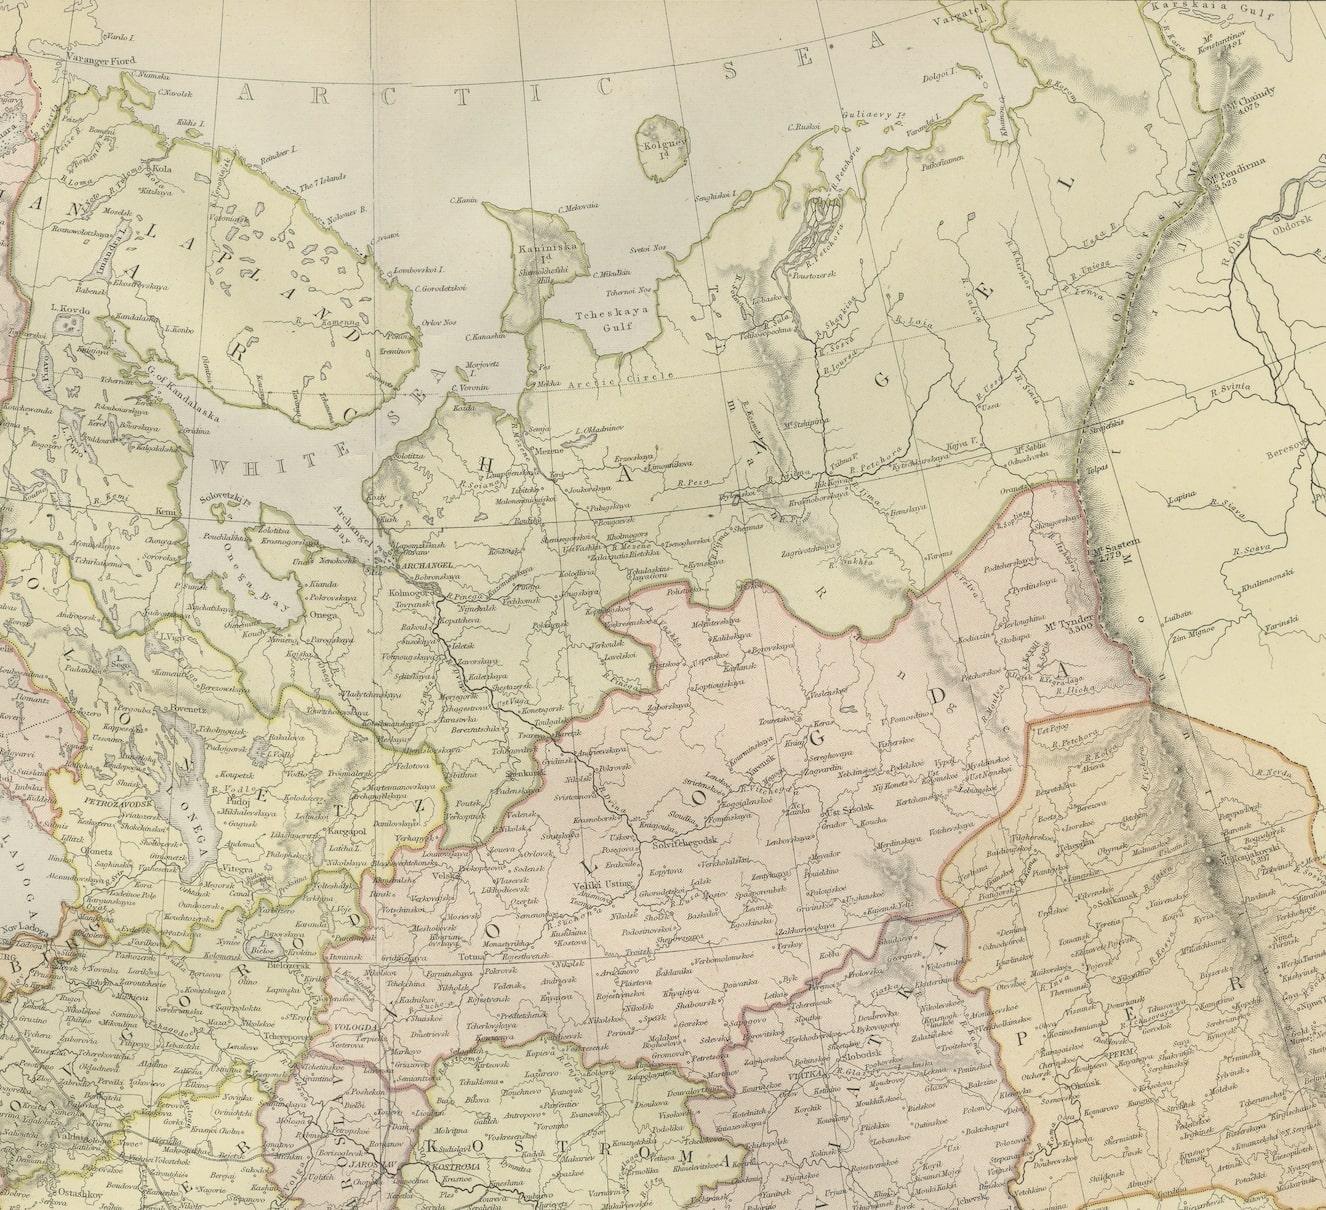 Embark on an enthralling journey with an original Antique Map of European Russia from the esteemed 'Comprehensive Atlas and Geography of the World,' meticulously crafted in 1882. This exquisite map intricately delineates European Russia, capturing